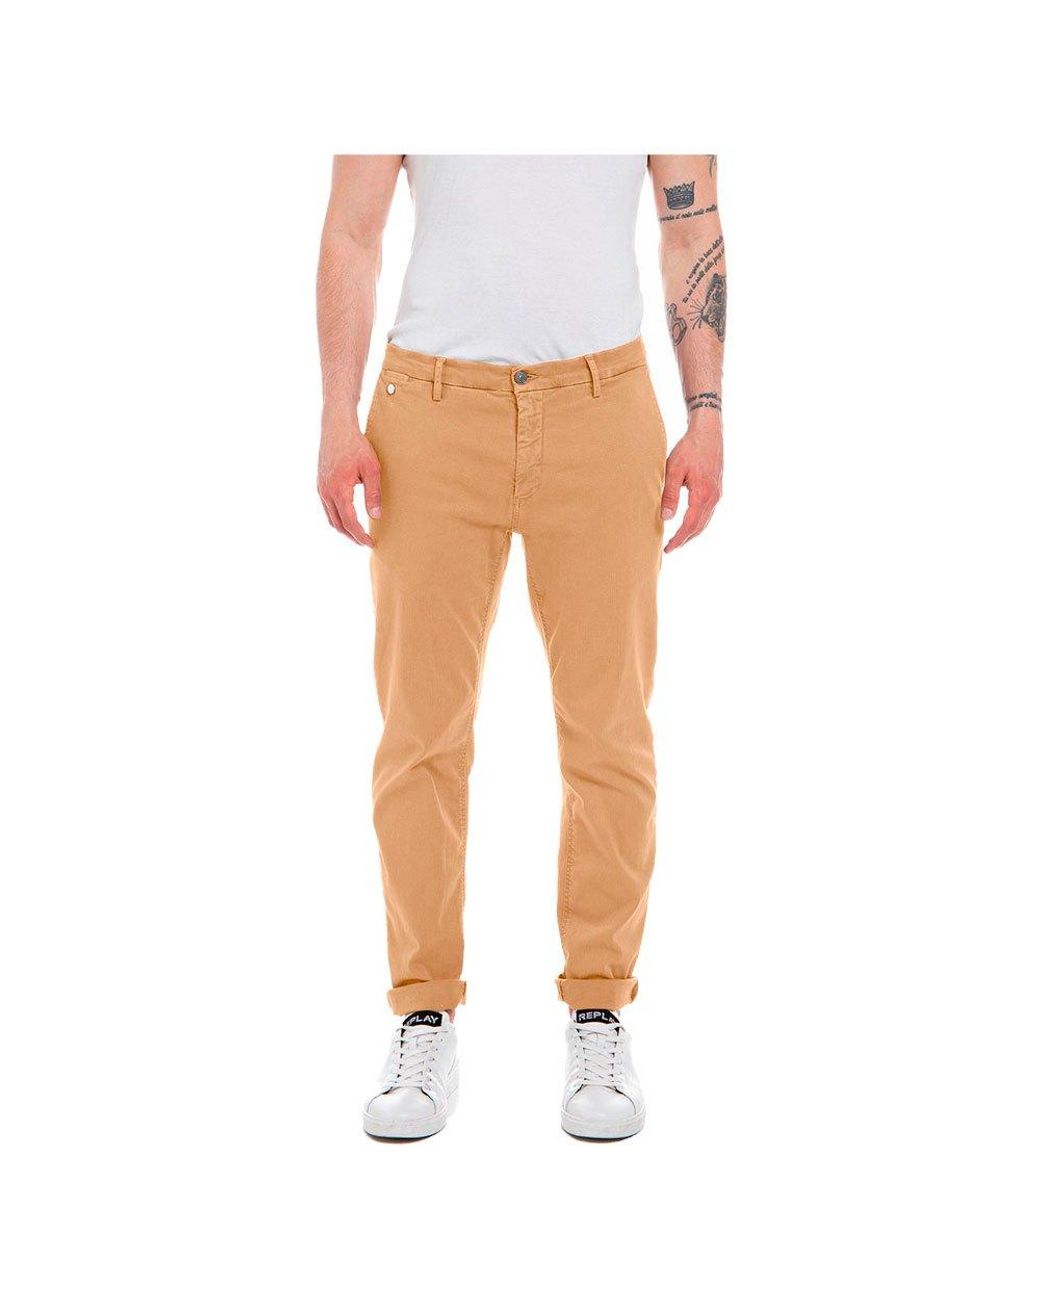 Replay M9722a.000.86197 Chino Pants in Orange for | Lyst